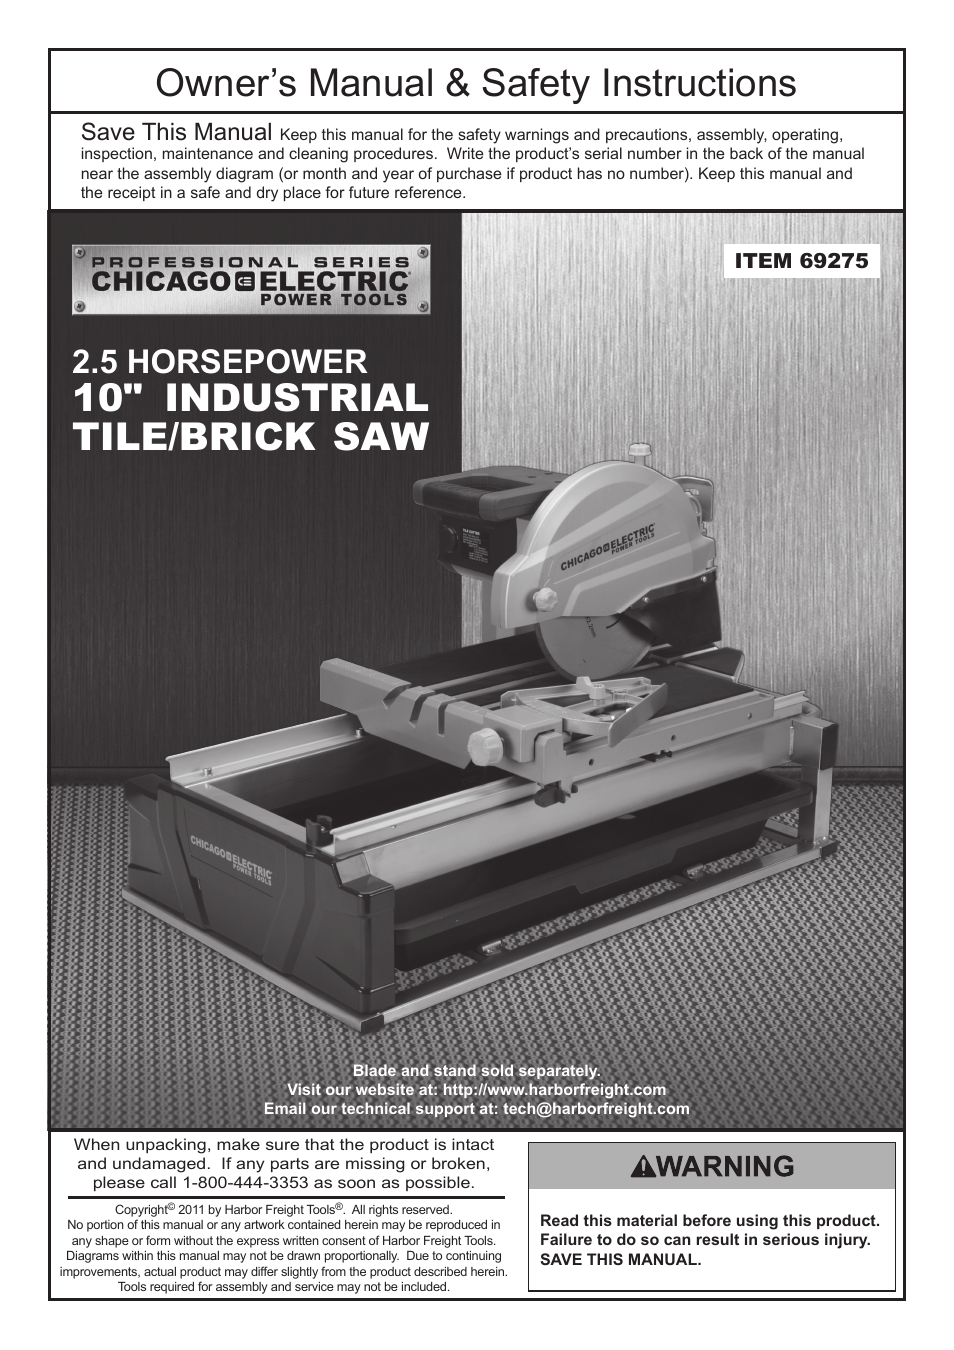 Chicago Electric 10" Industrial Tile/Brick Saw 69275 User Manual | 20 pages